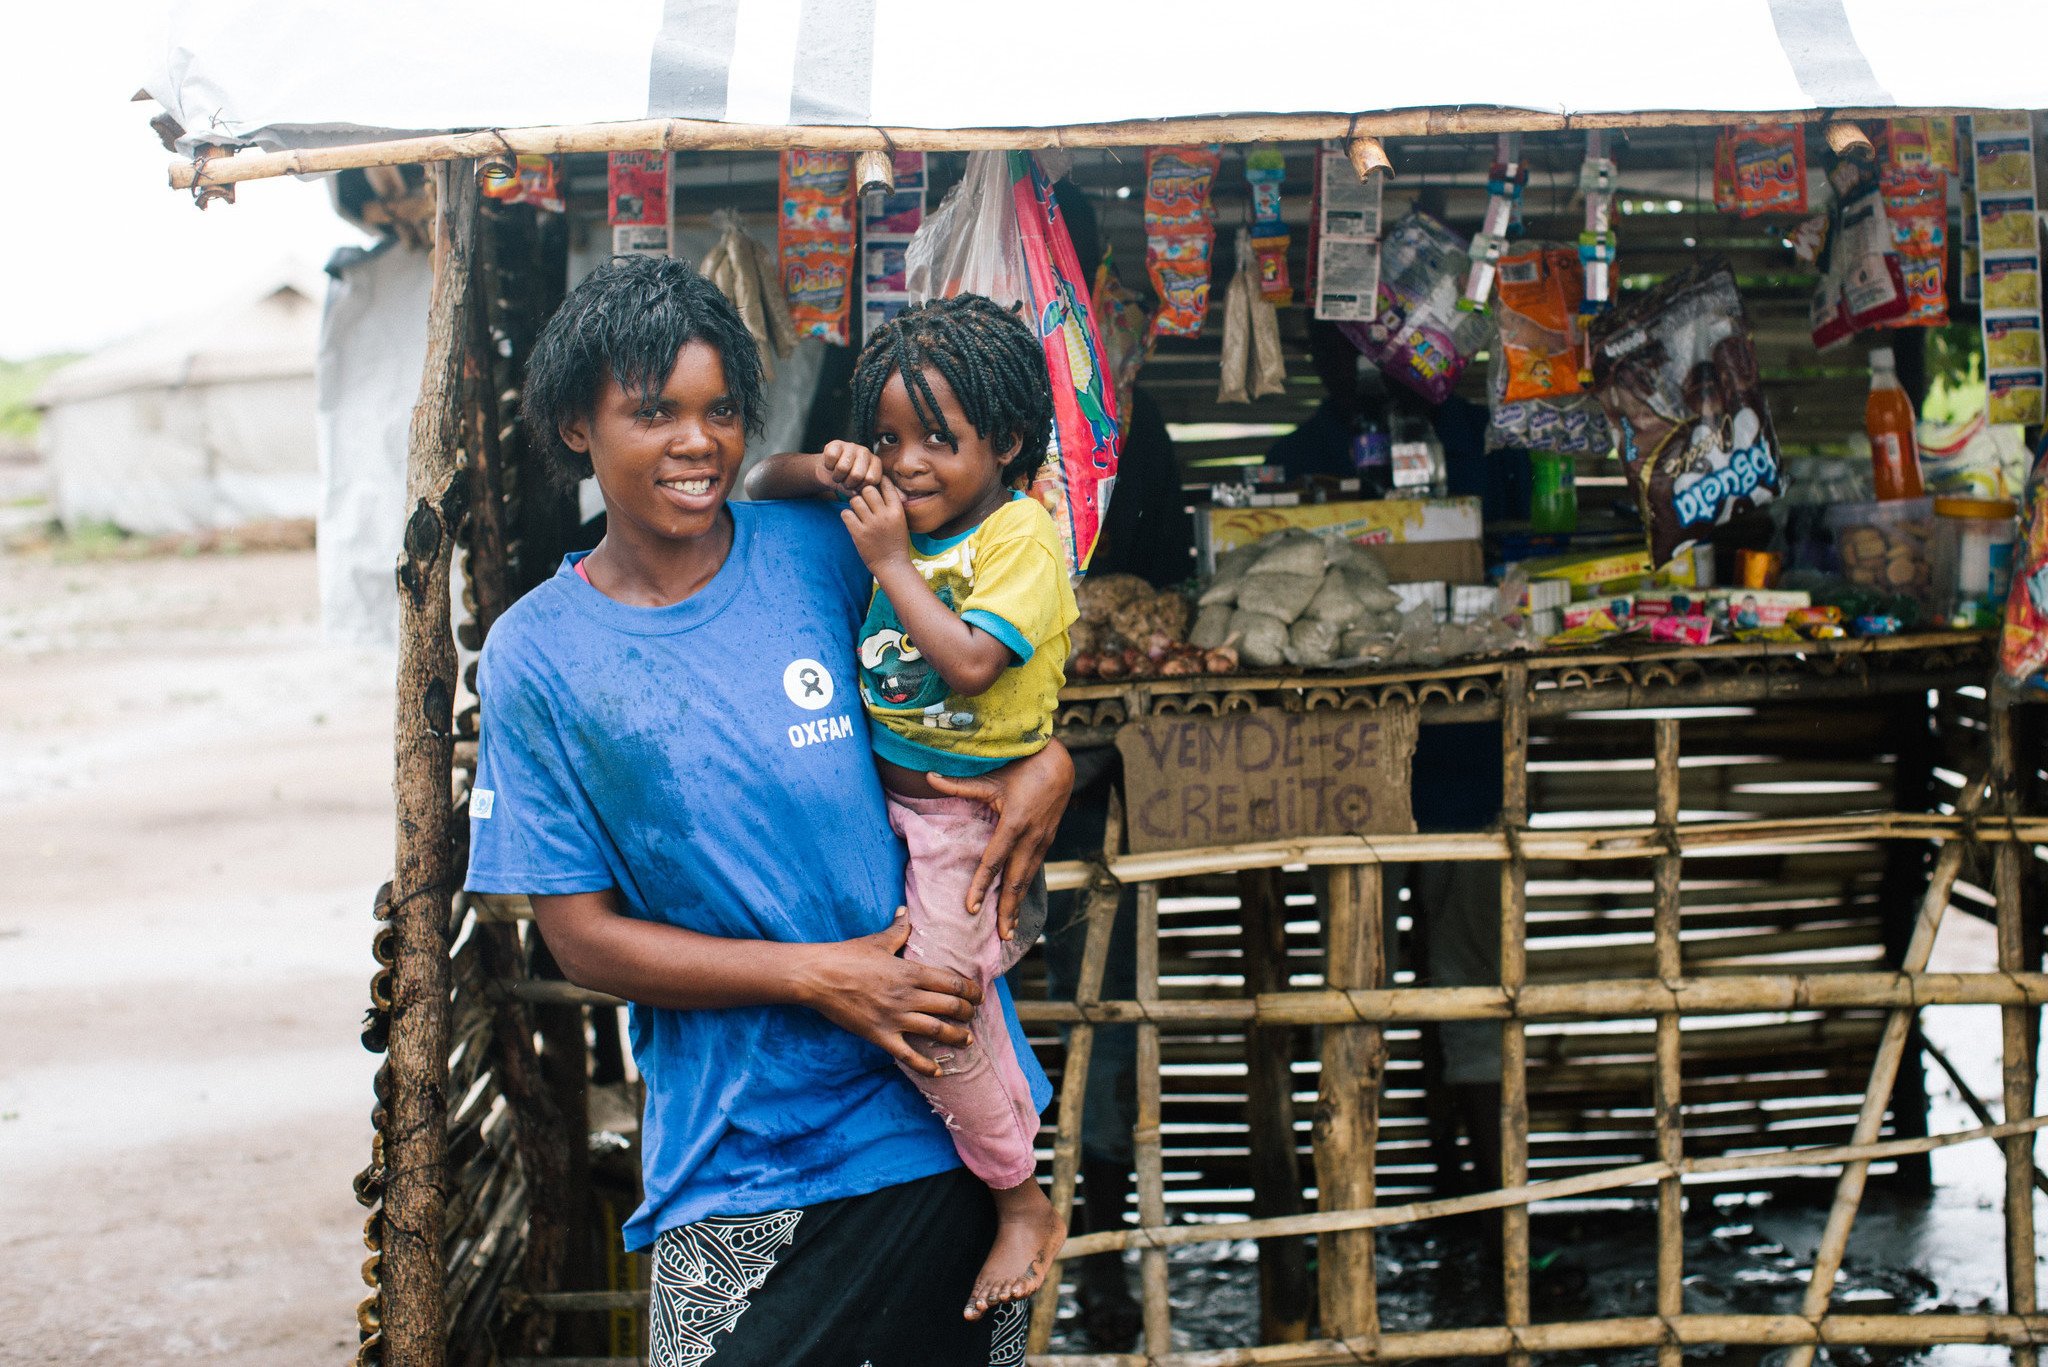 The cyclones forced much of the economy to grind to a halt. Before Idai hit, Sonia’s (19) job was to encourage women who had just given birth to register their children and go to a postnatal follow-up session. After the cyclones, she worked a few days at a time for Oxfam as an activist explaining why good hygiene is important and how clean water prevents diseases. With the money she has earned from this job, she has opened up a small tuck shop, which she hopes will provide an income for her and her two children.